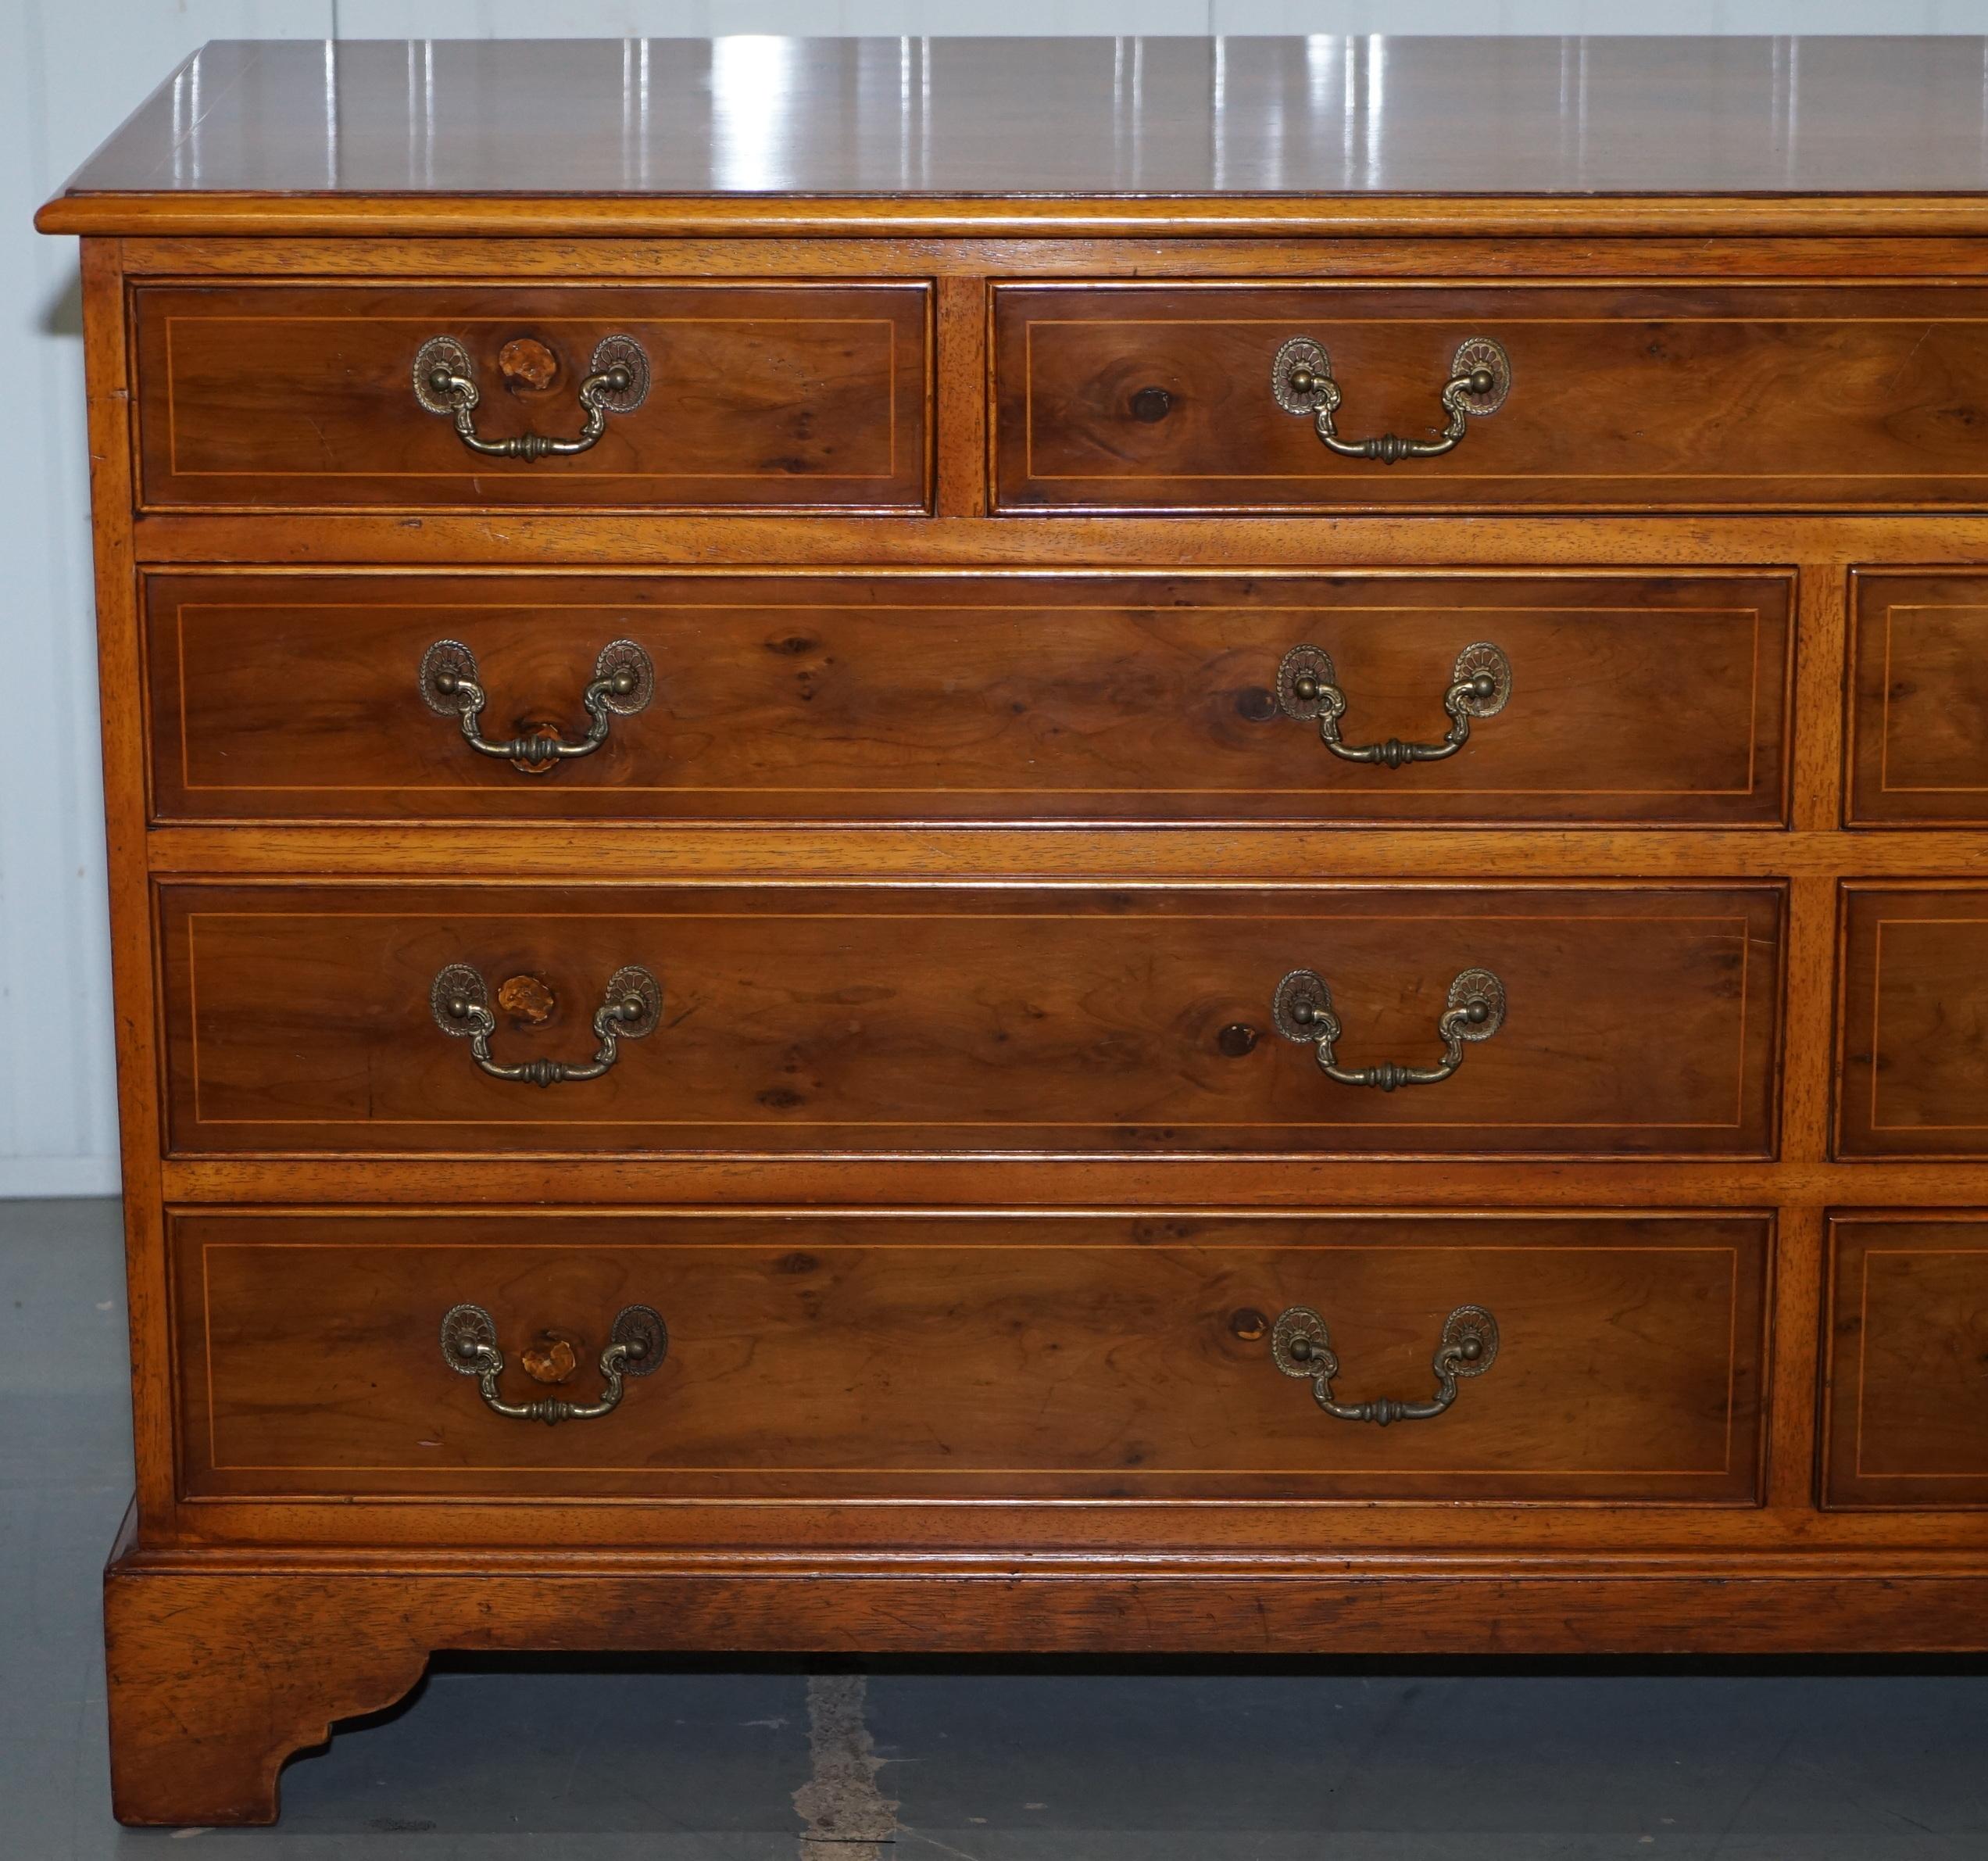 Contemporary Vintage Burr Yew Wood Large Sideboard Bank of Drawers Campaign Style, England